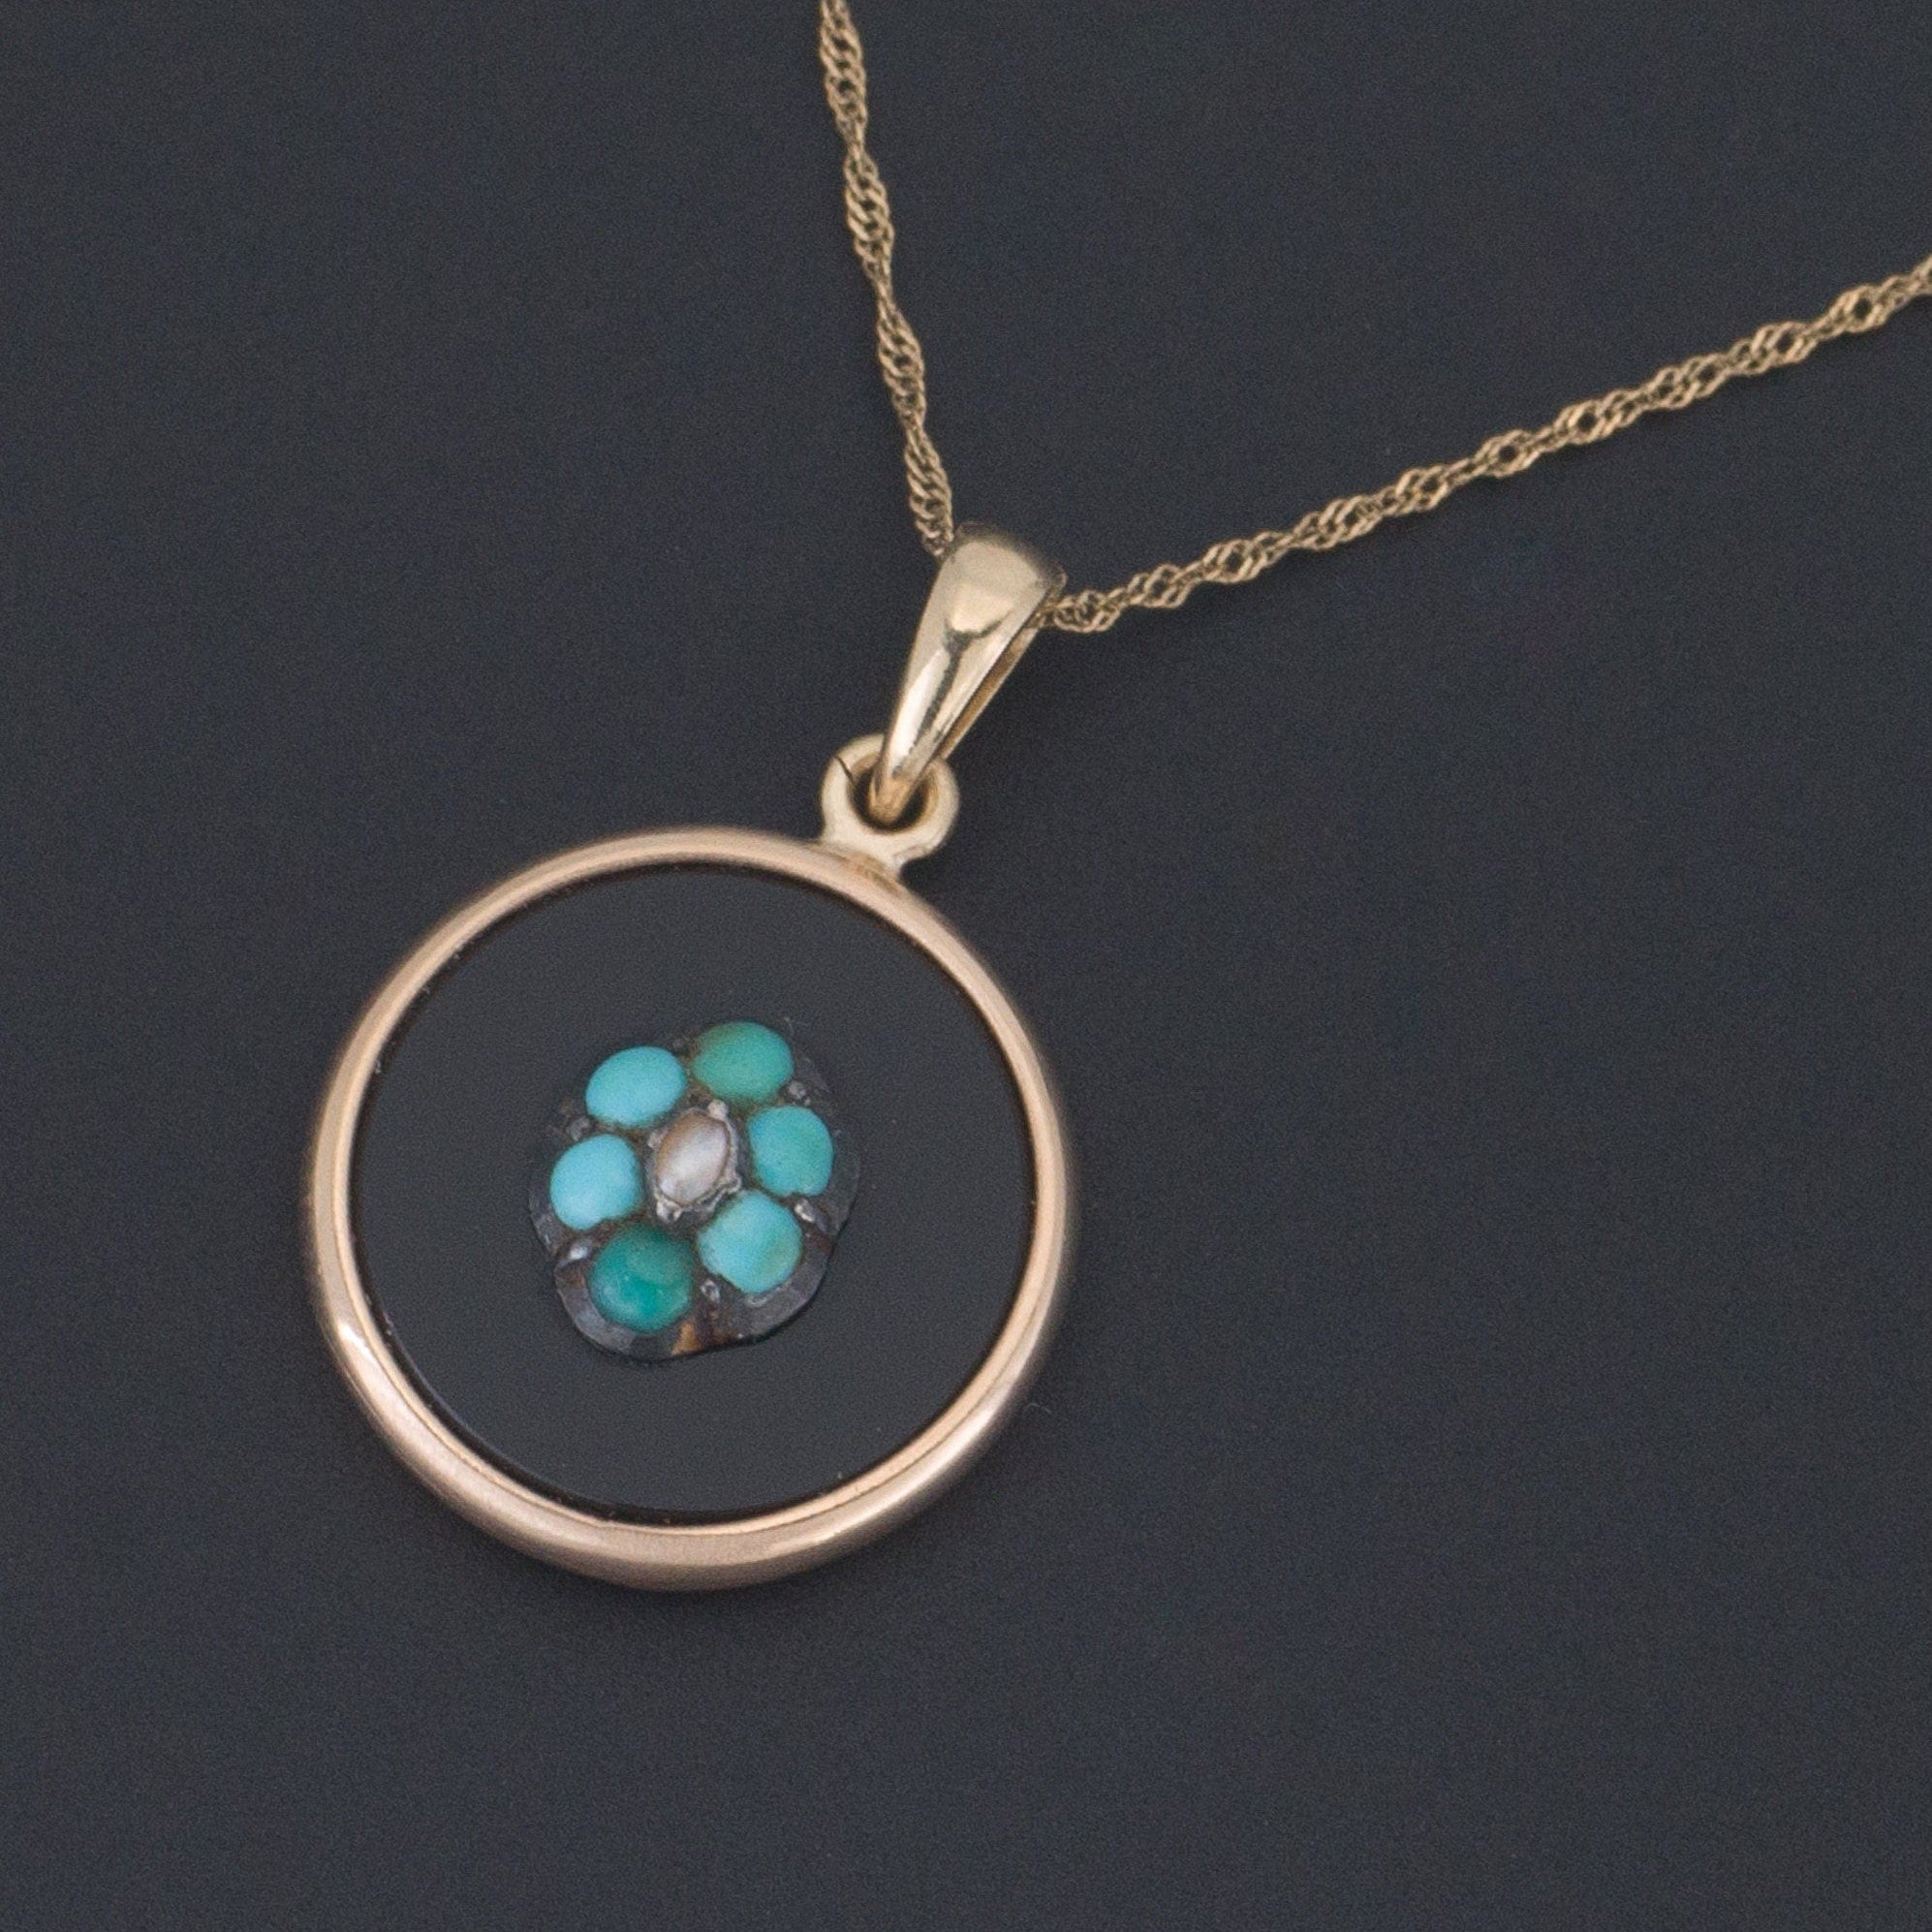 Antique Turquoise Forget Me Not Conversion Necklace of 14k Gold